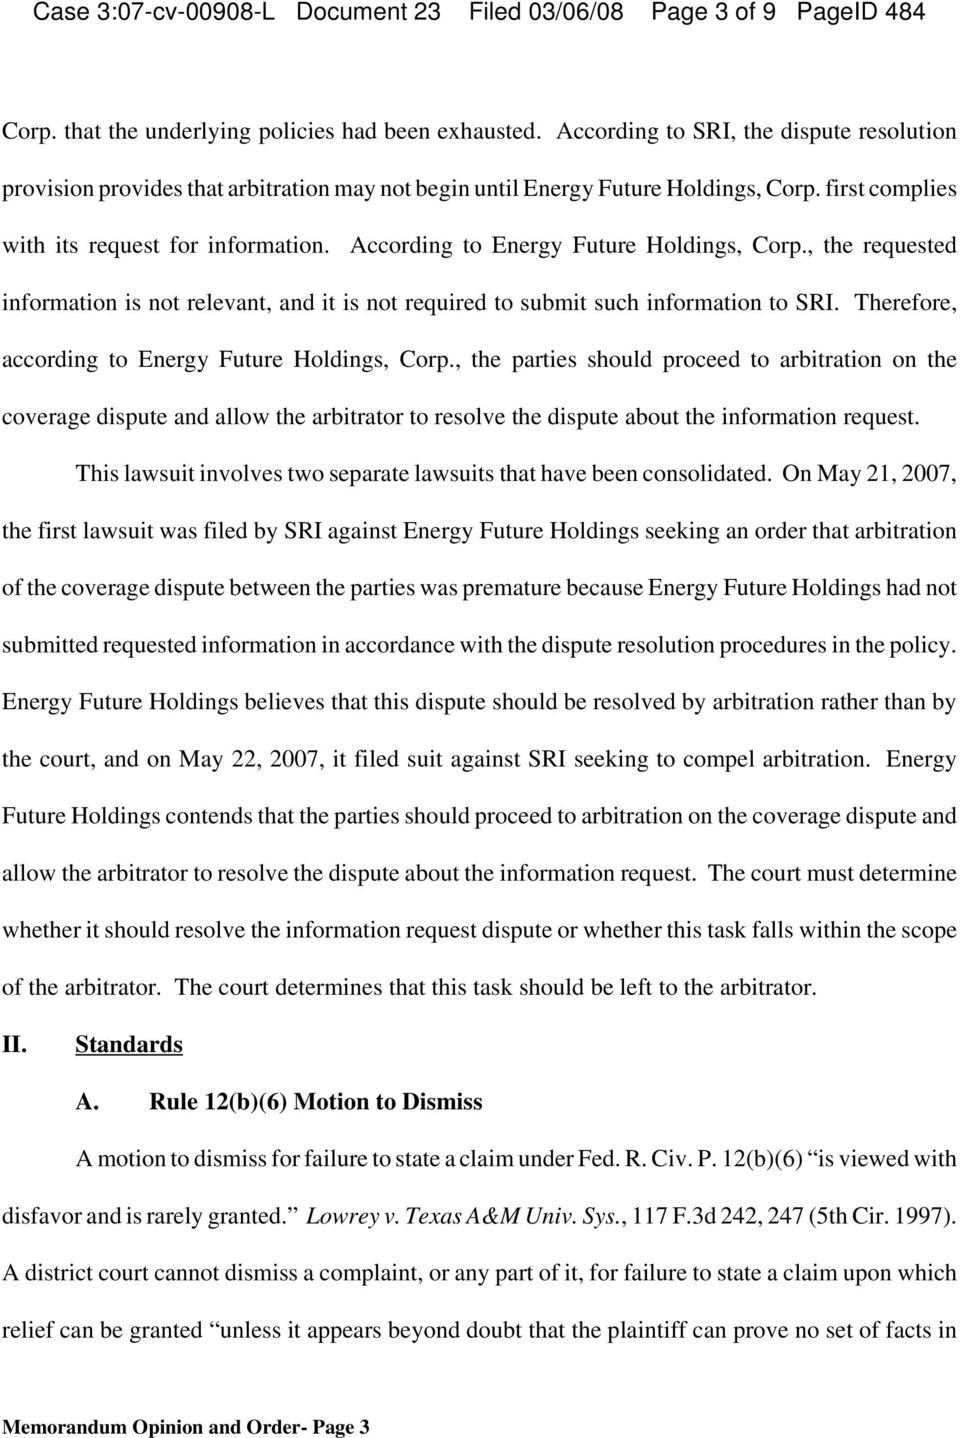 According to Energy Future Holdings, Corp., the requested information is not relevant, and it is not required to submit such information to SRI. Therefore, according to Energy Future Holdings, Corp.